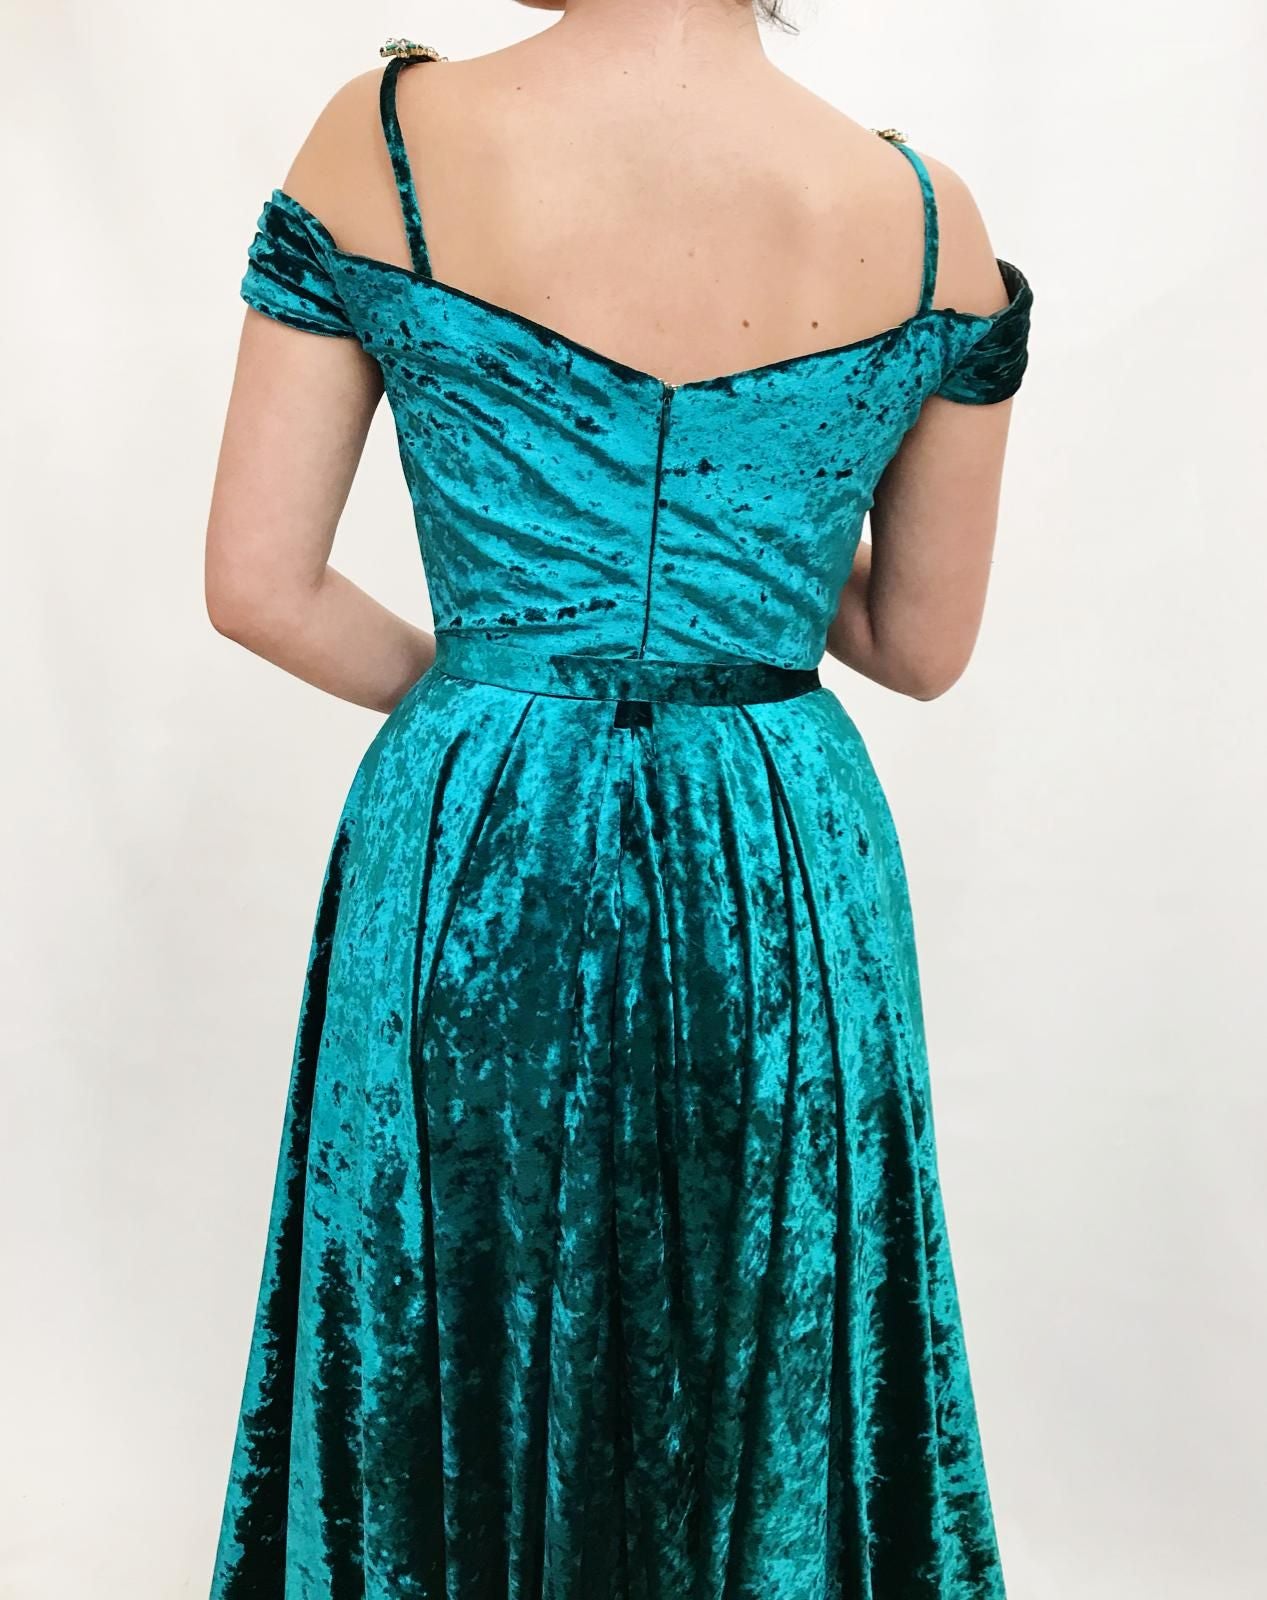 Green A-Line dress with spaghetti straps, off the shoulder sleeves and embroidery